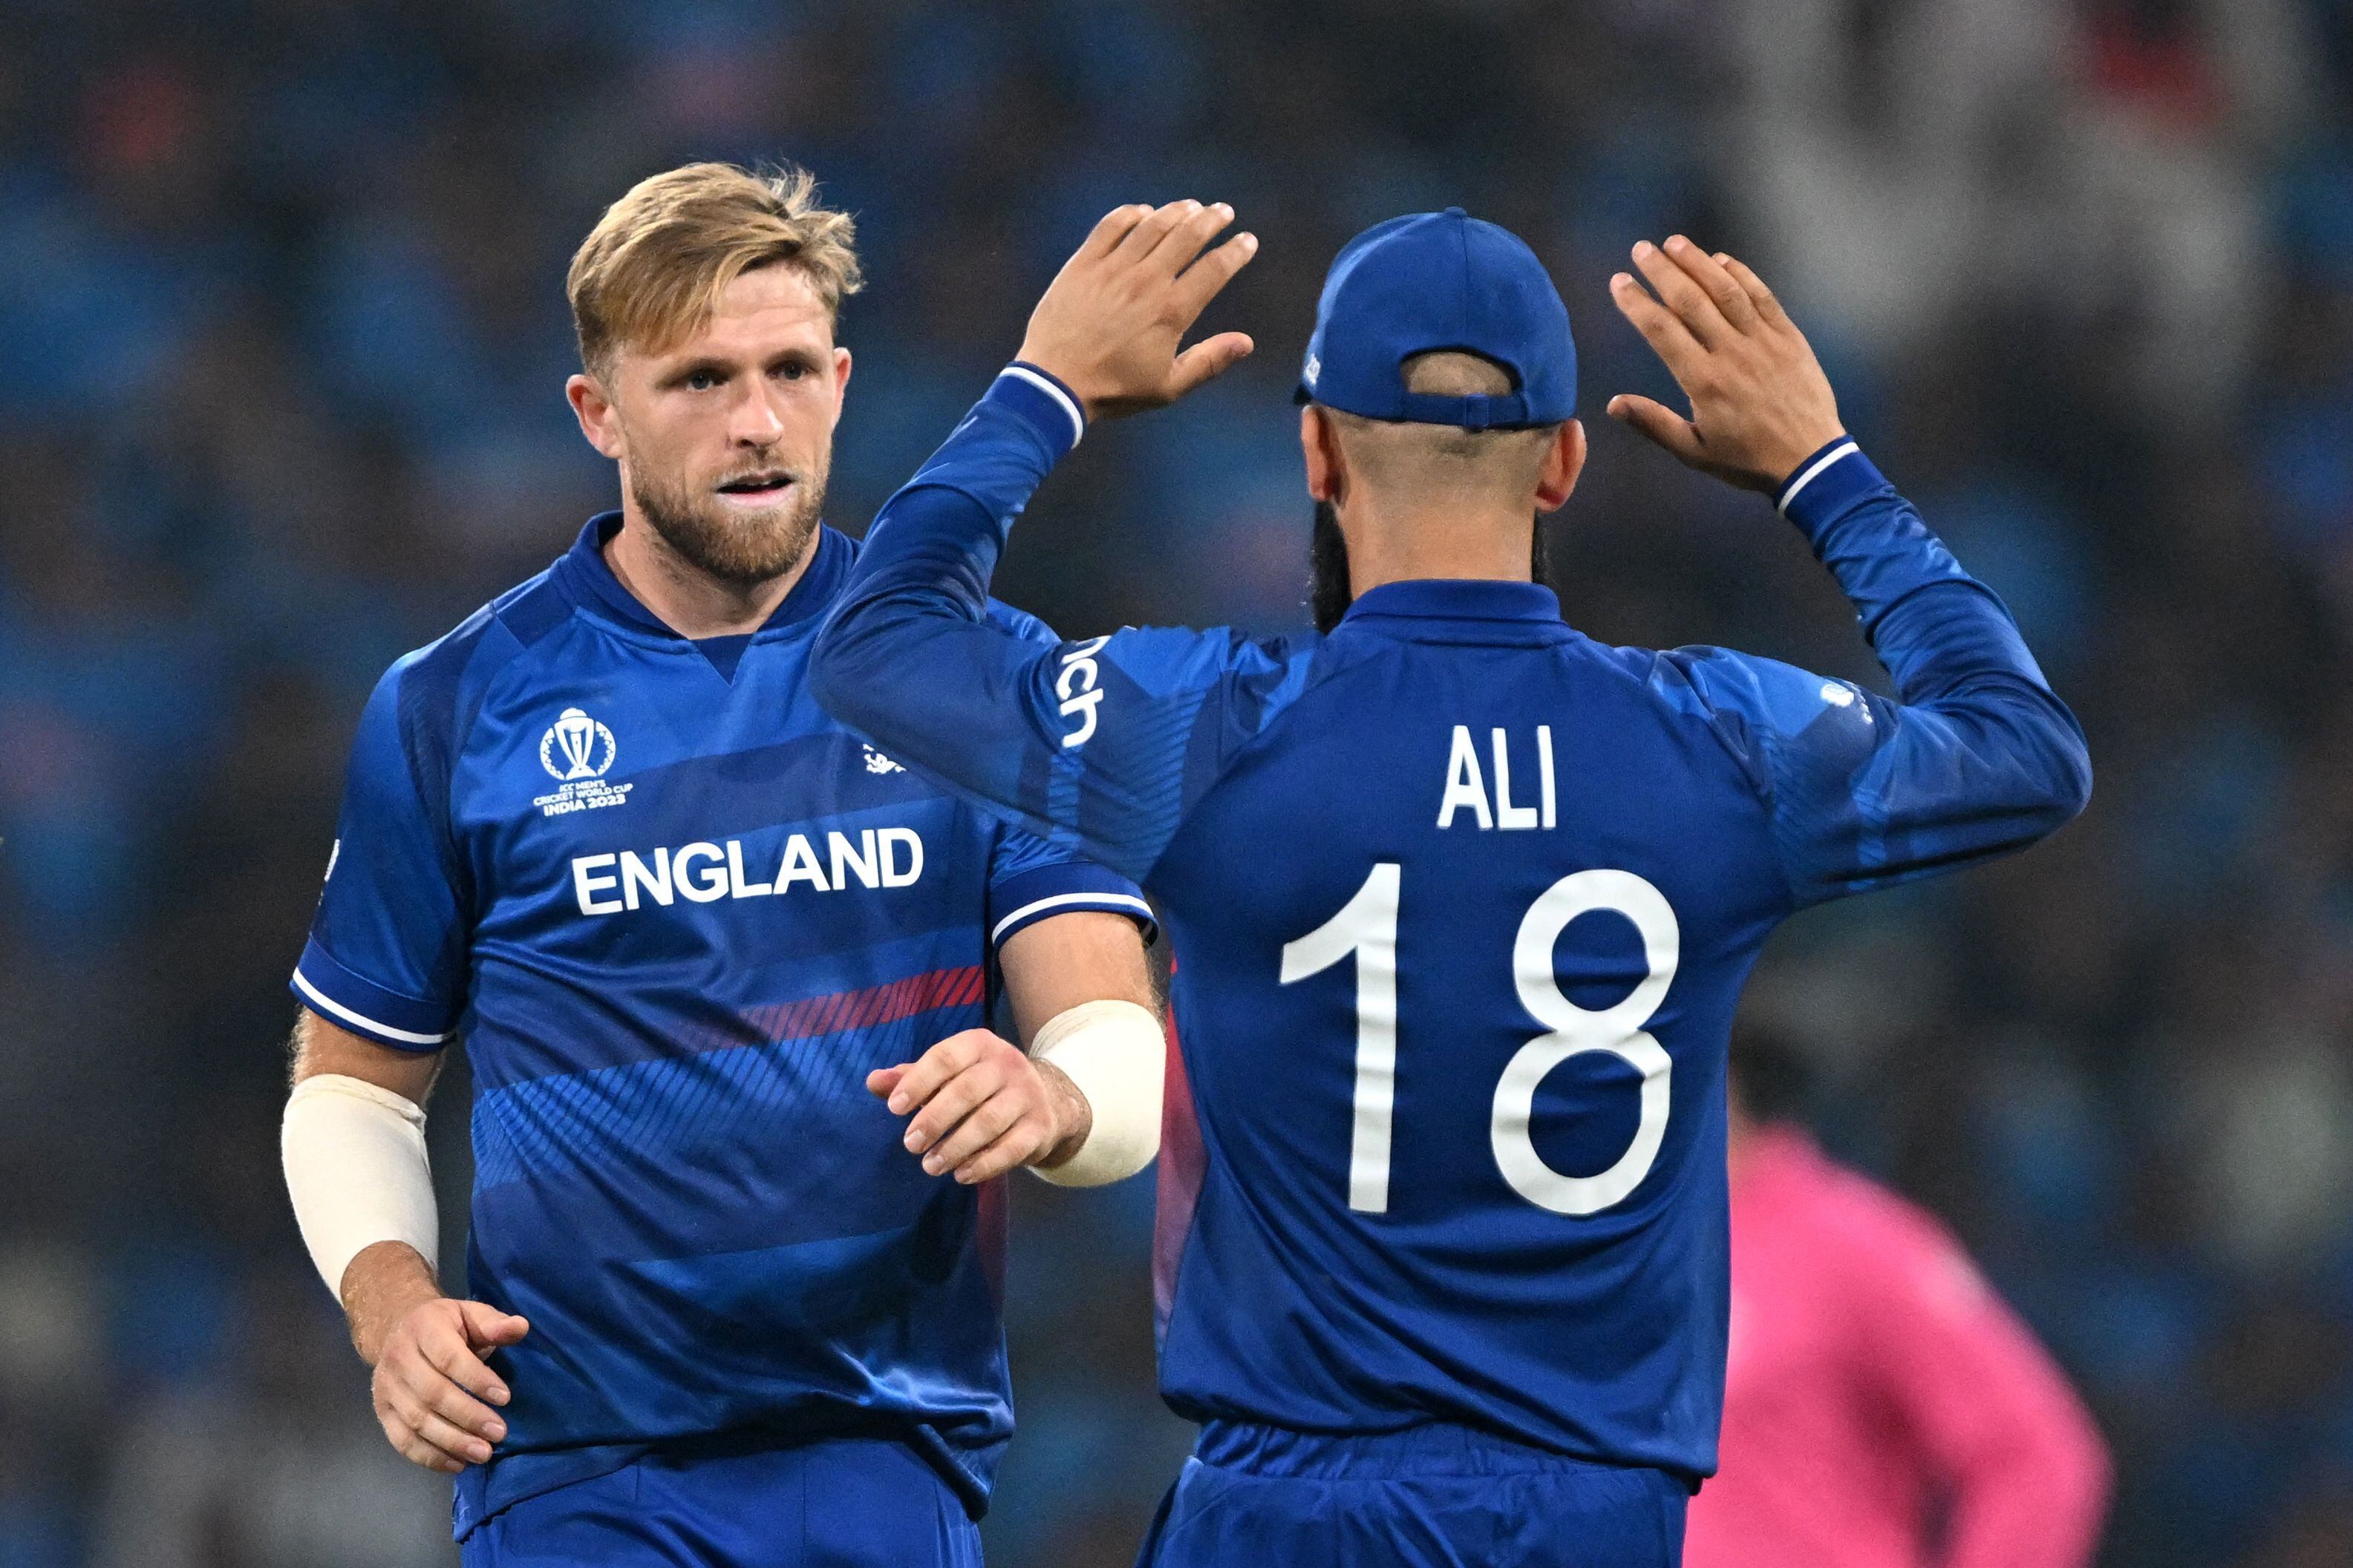 England did not know qualification rules and may miss Champions Trophy